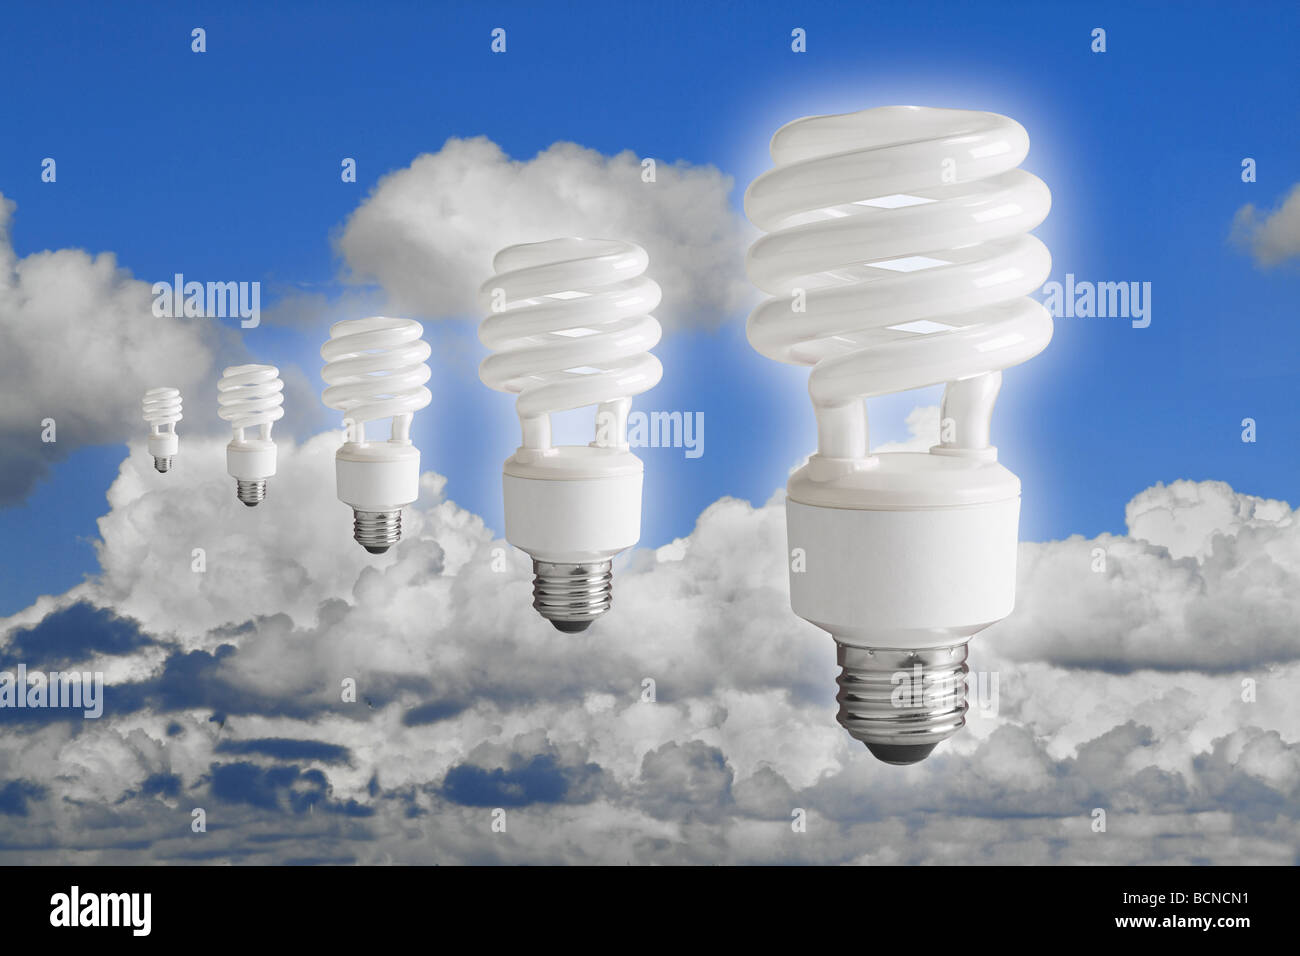 Compact Fluorescent Light Bulb, CFL Bulb Floating In Sky Stock Photo